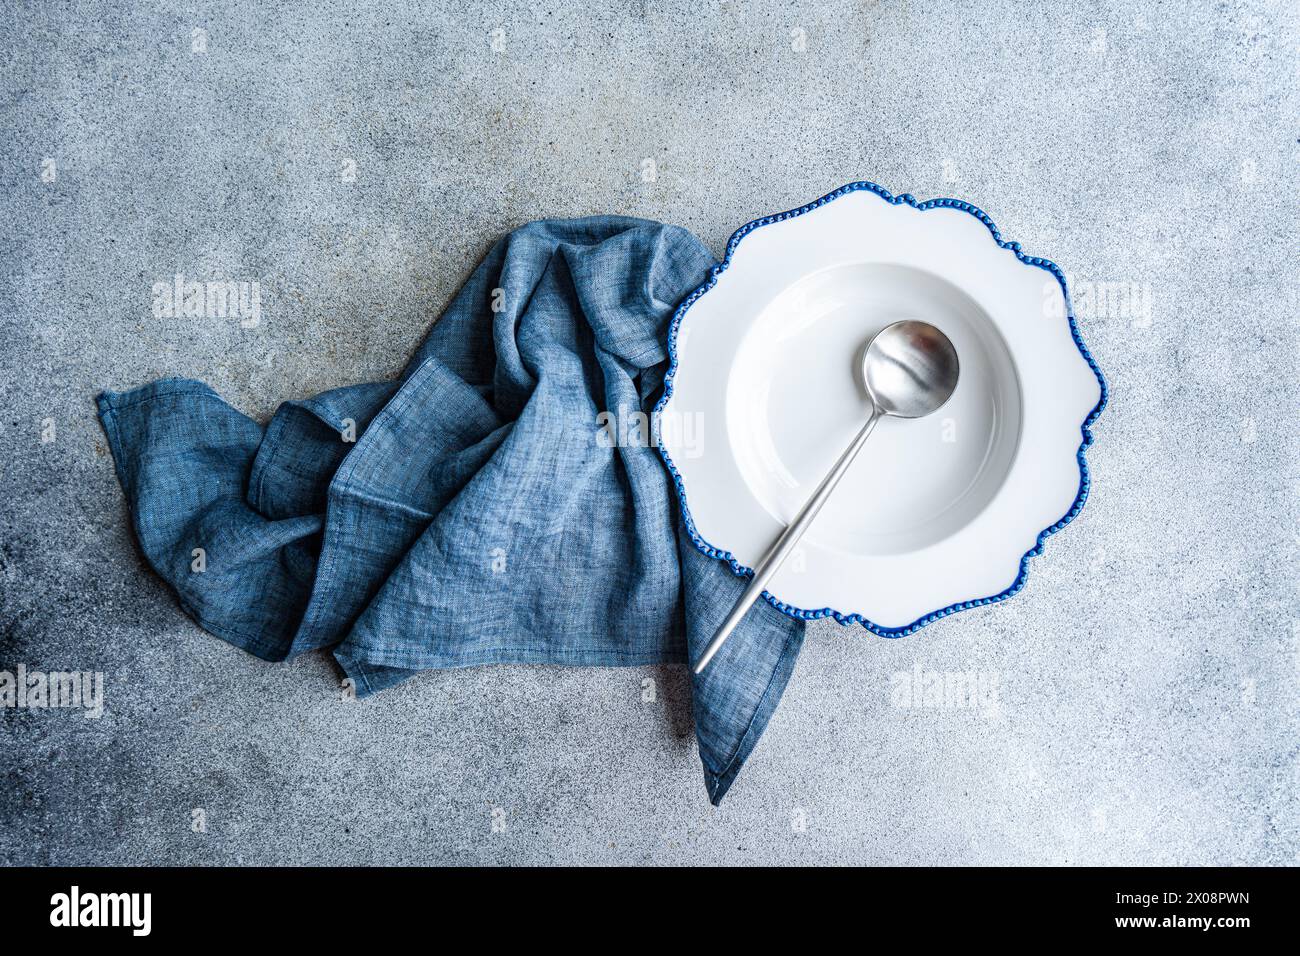 Elegant white plate with blue scalloped edges, a silver spoon, and a blue napkin set on a textured background Stock Photo